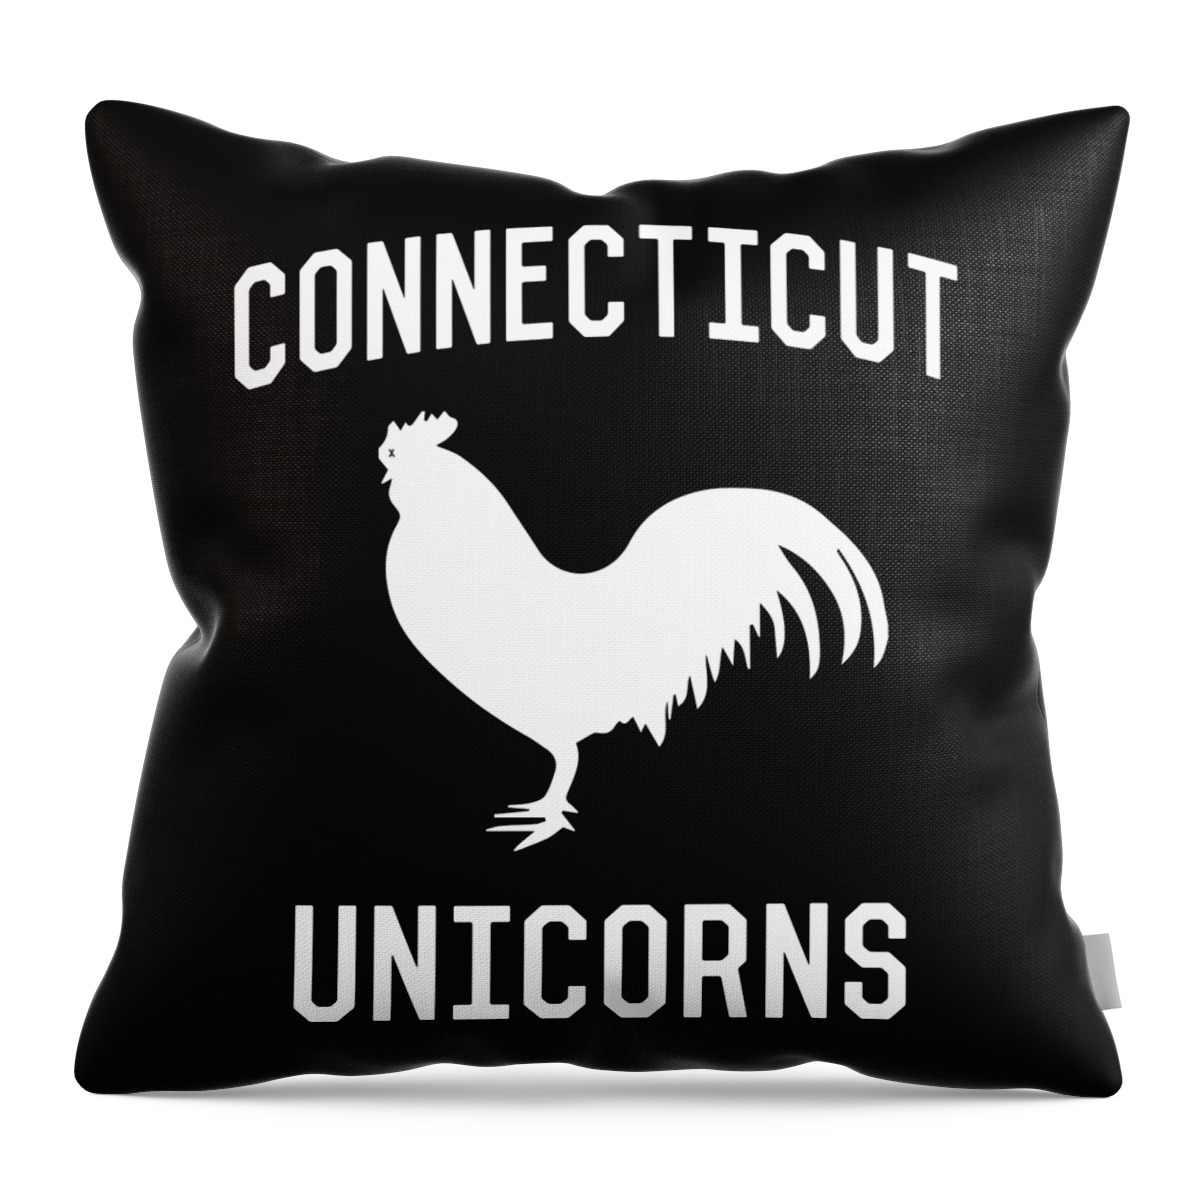 Funny Throw Pillow featuring the digital art Connecticut Unicorns by Flippin Sweet Gear